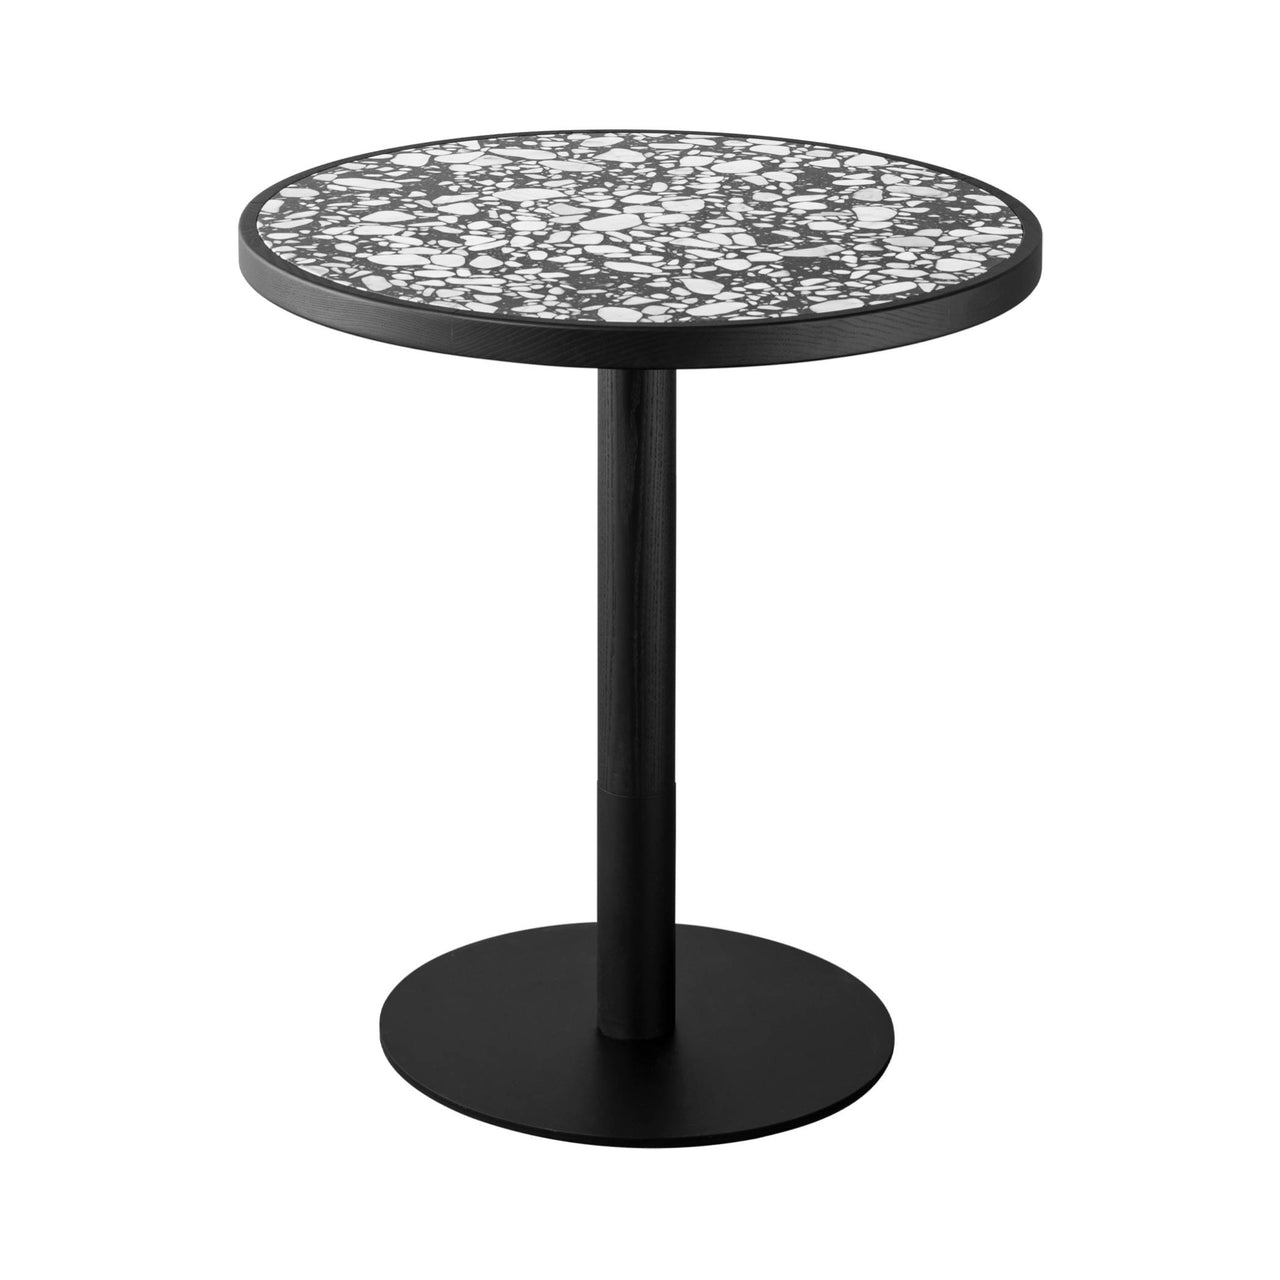 Briscola Bistro Table with Wooden Frame: Marble Top + Round + Palladio Moro Marble + Black Ash + Lacquered Black